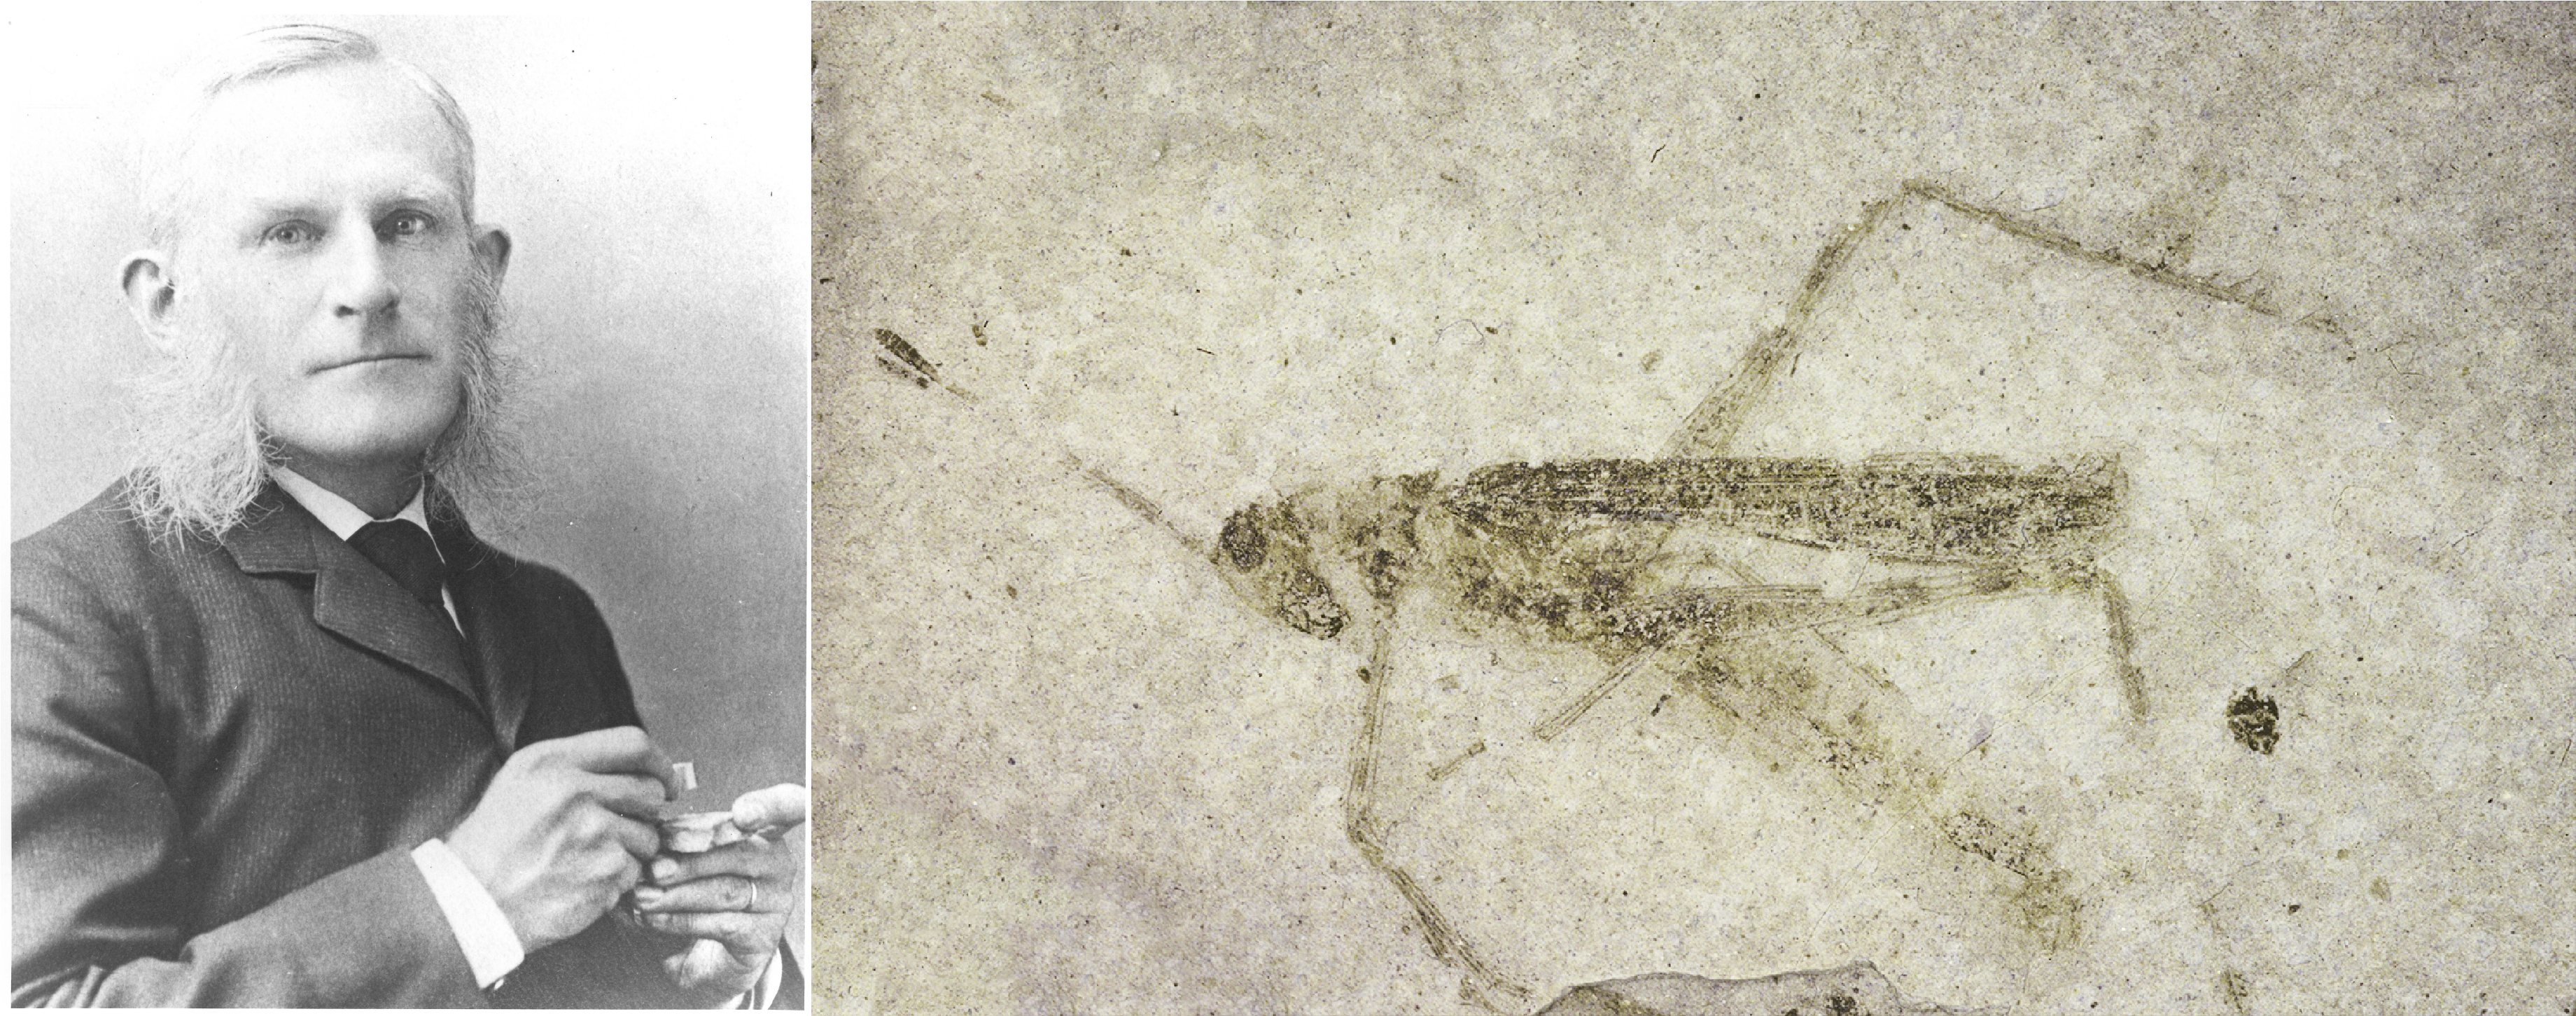 A picture of a man on the left and a grasshopper fossil on the right.